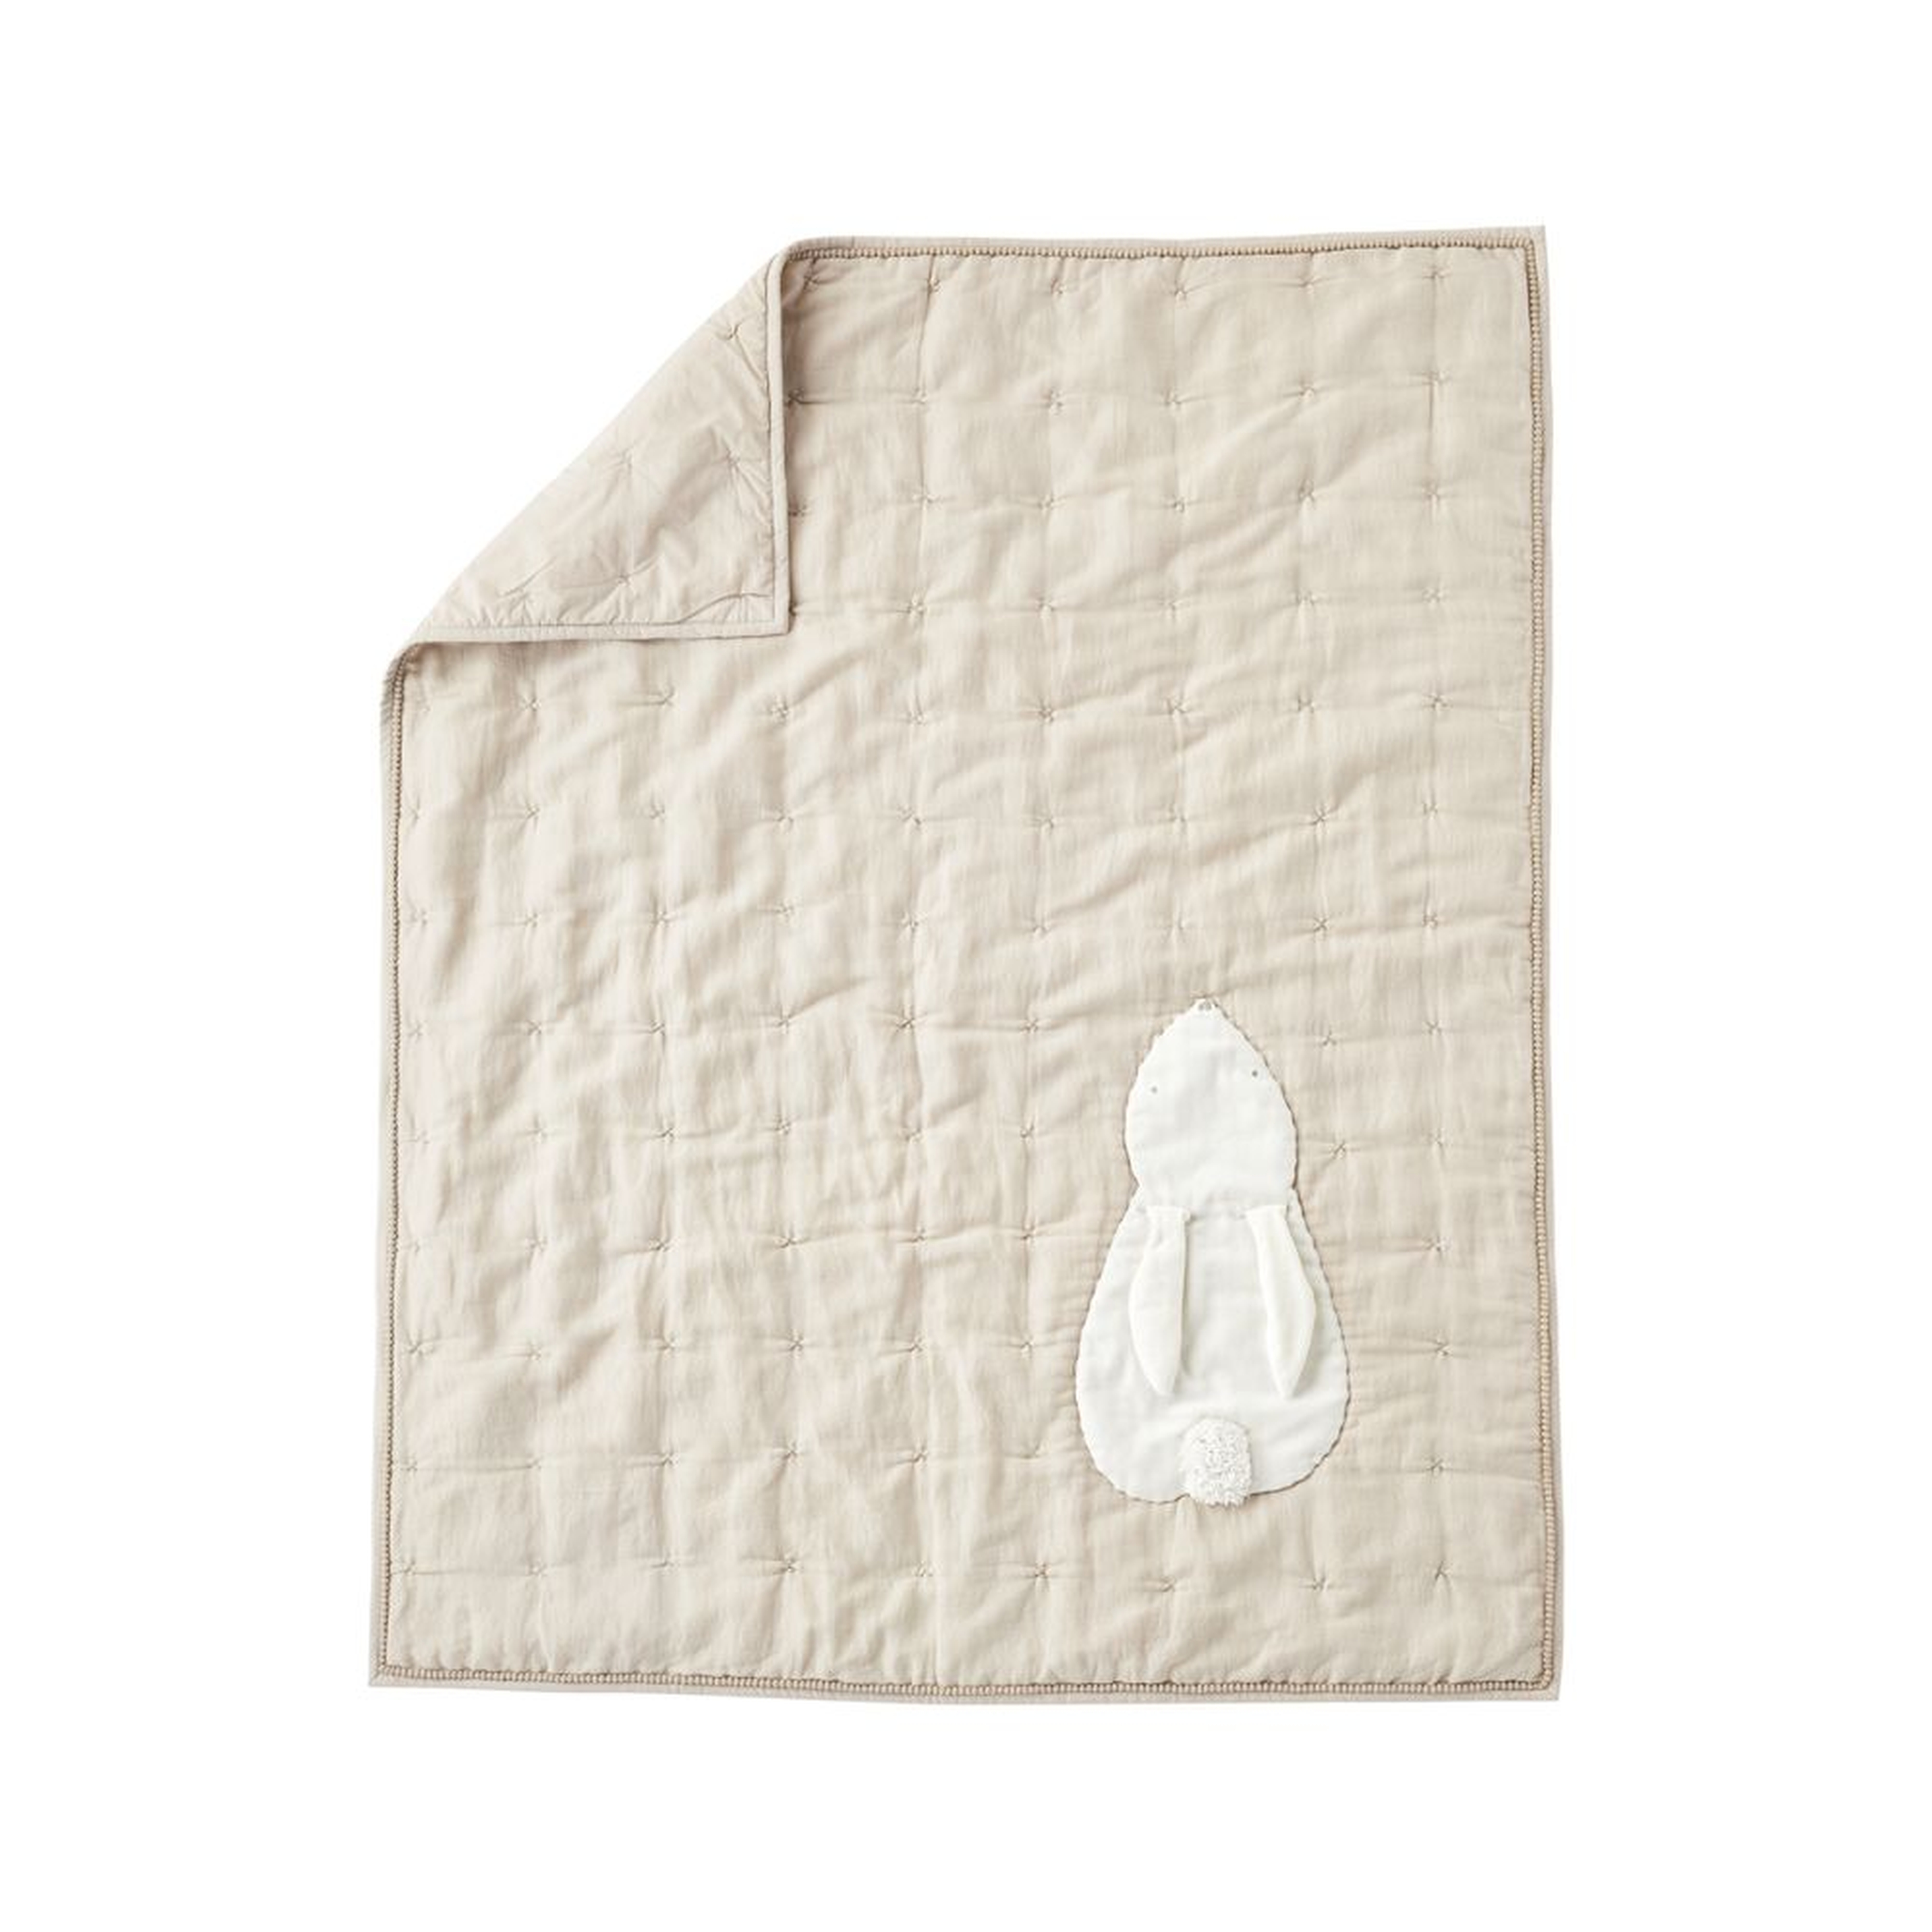 Hoppy Tails Pom Pom Baby Crib Quilt - Crate and Barrel